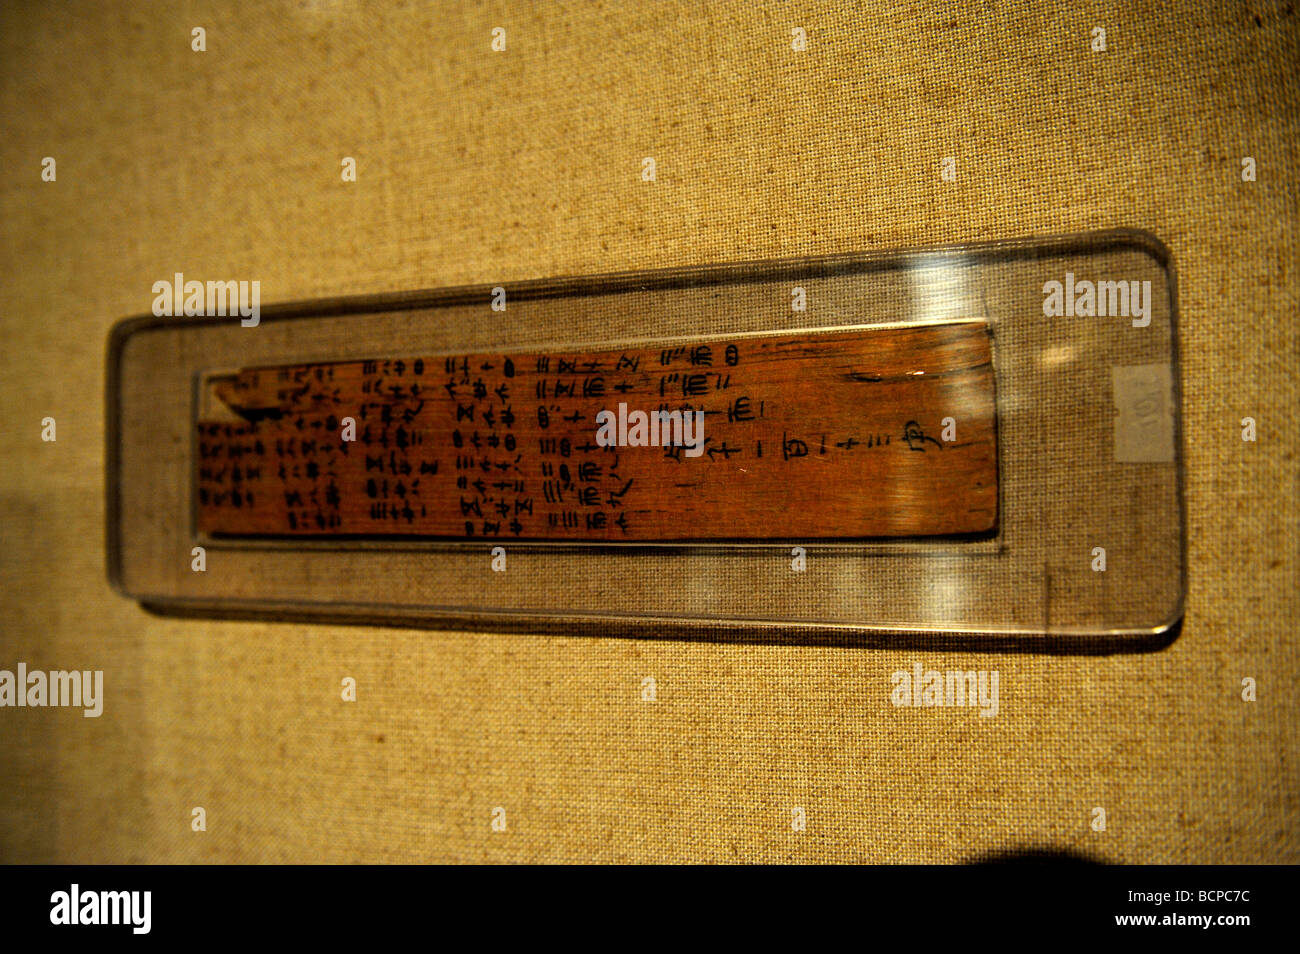 Bamboo strip with writings from West Han Dynasty, Capital Museum, Beijing, China Stock Photo